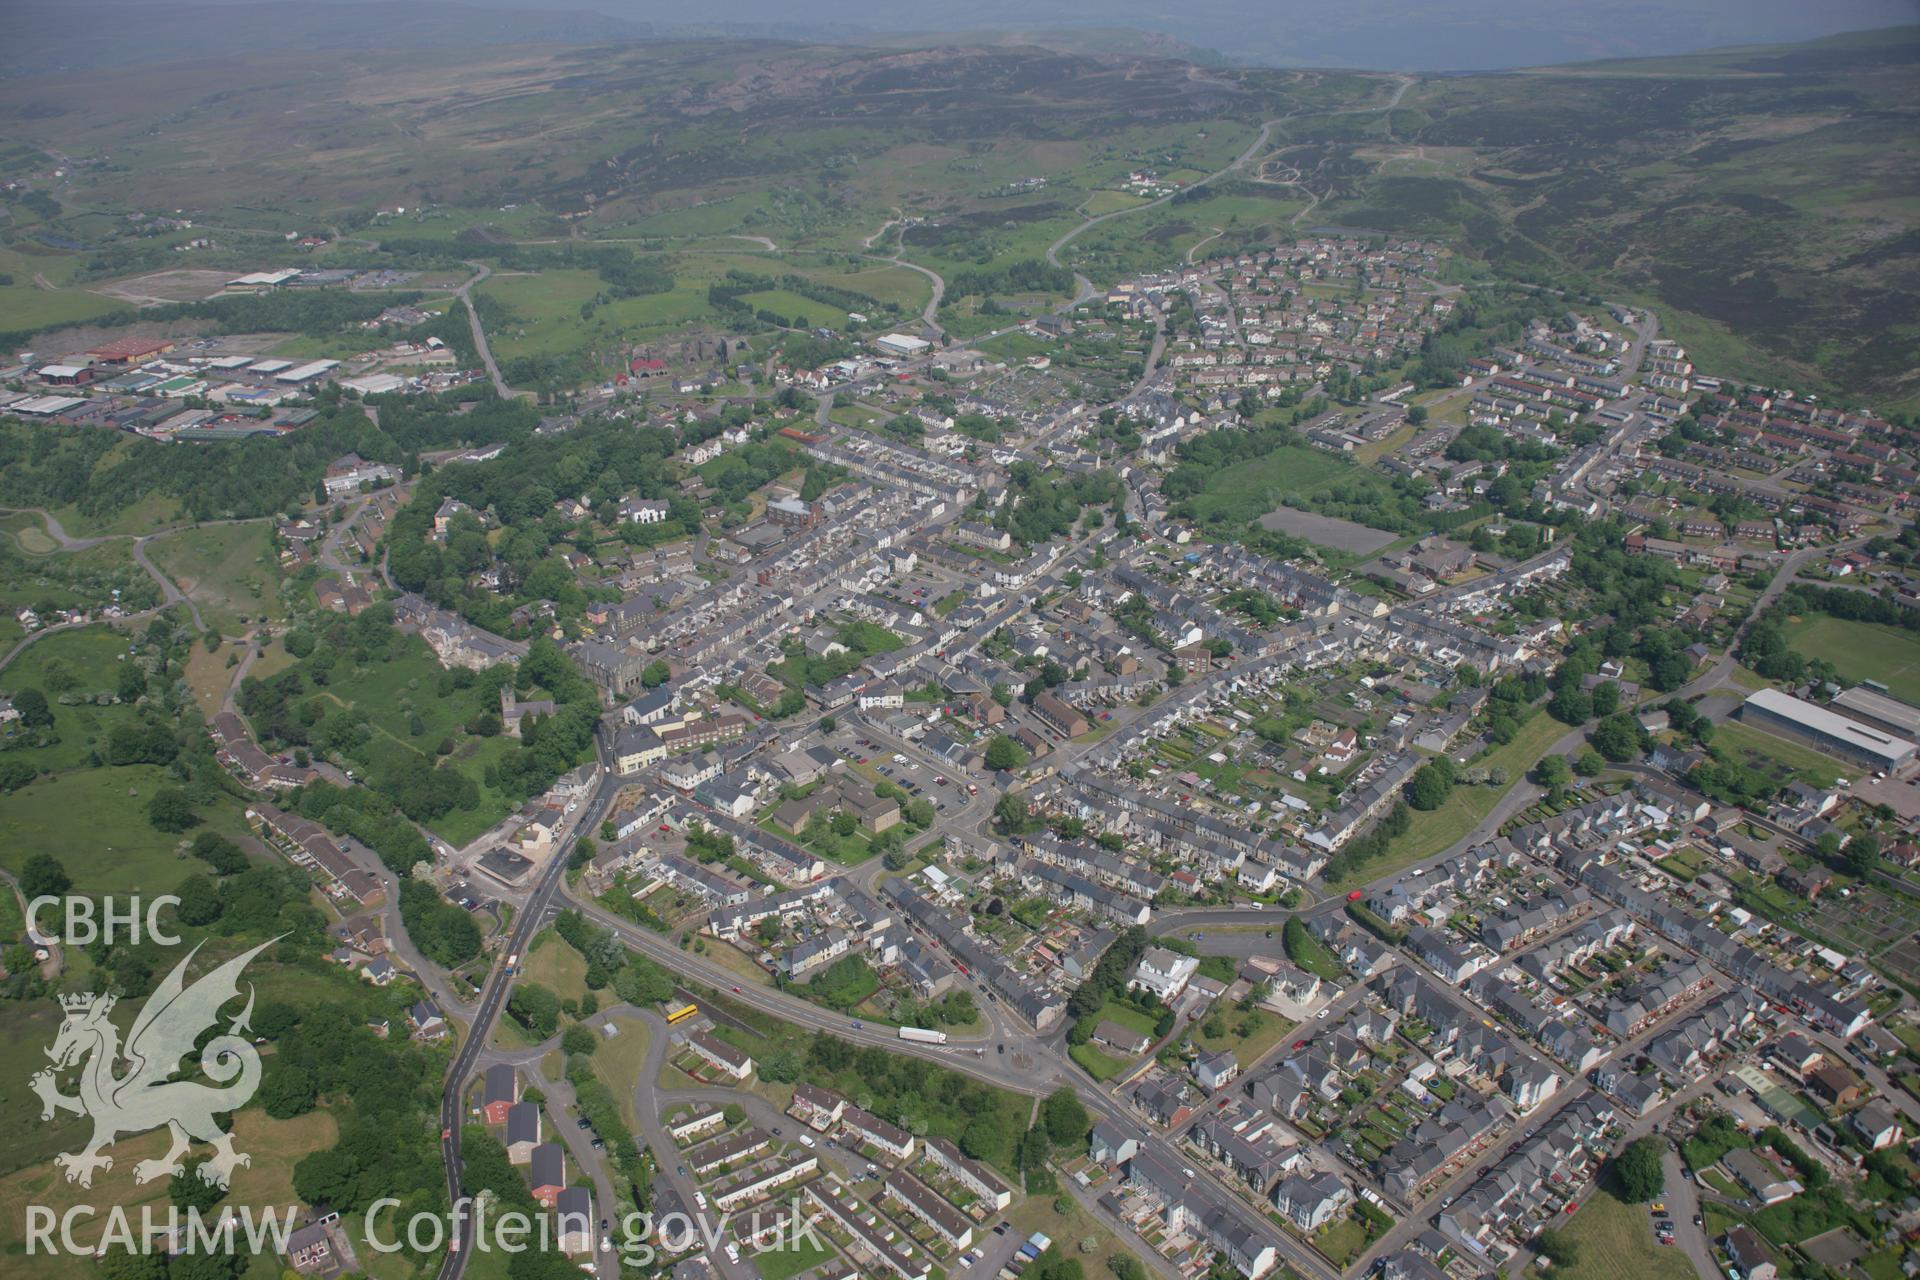 RCAHMW colour oblique aerial photograph of Blaenavon from the south-east. Taken on 09 June 2006 by Toby Driver.